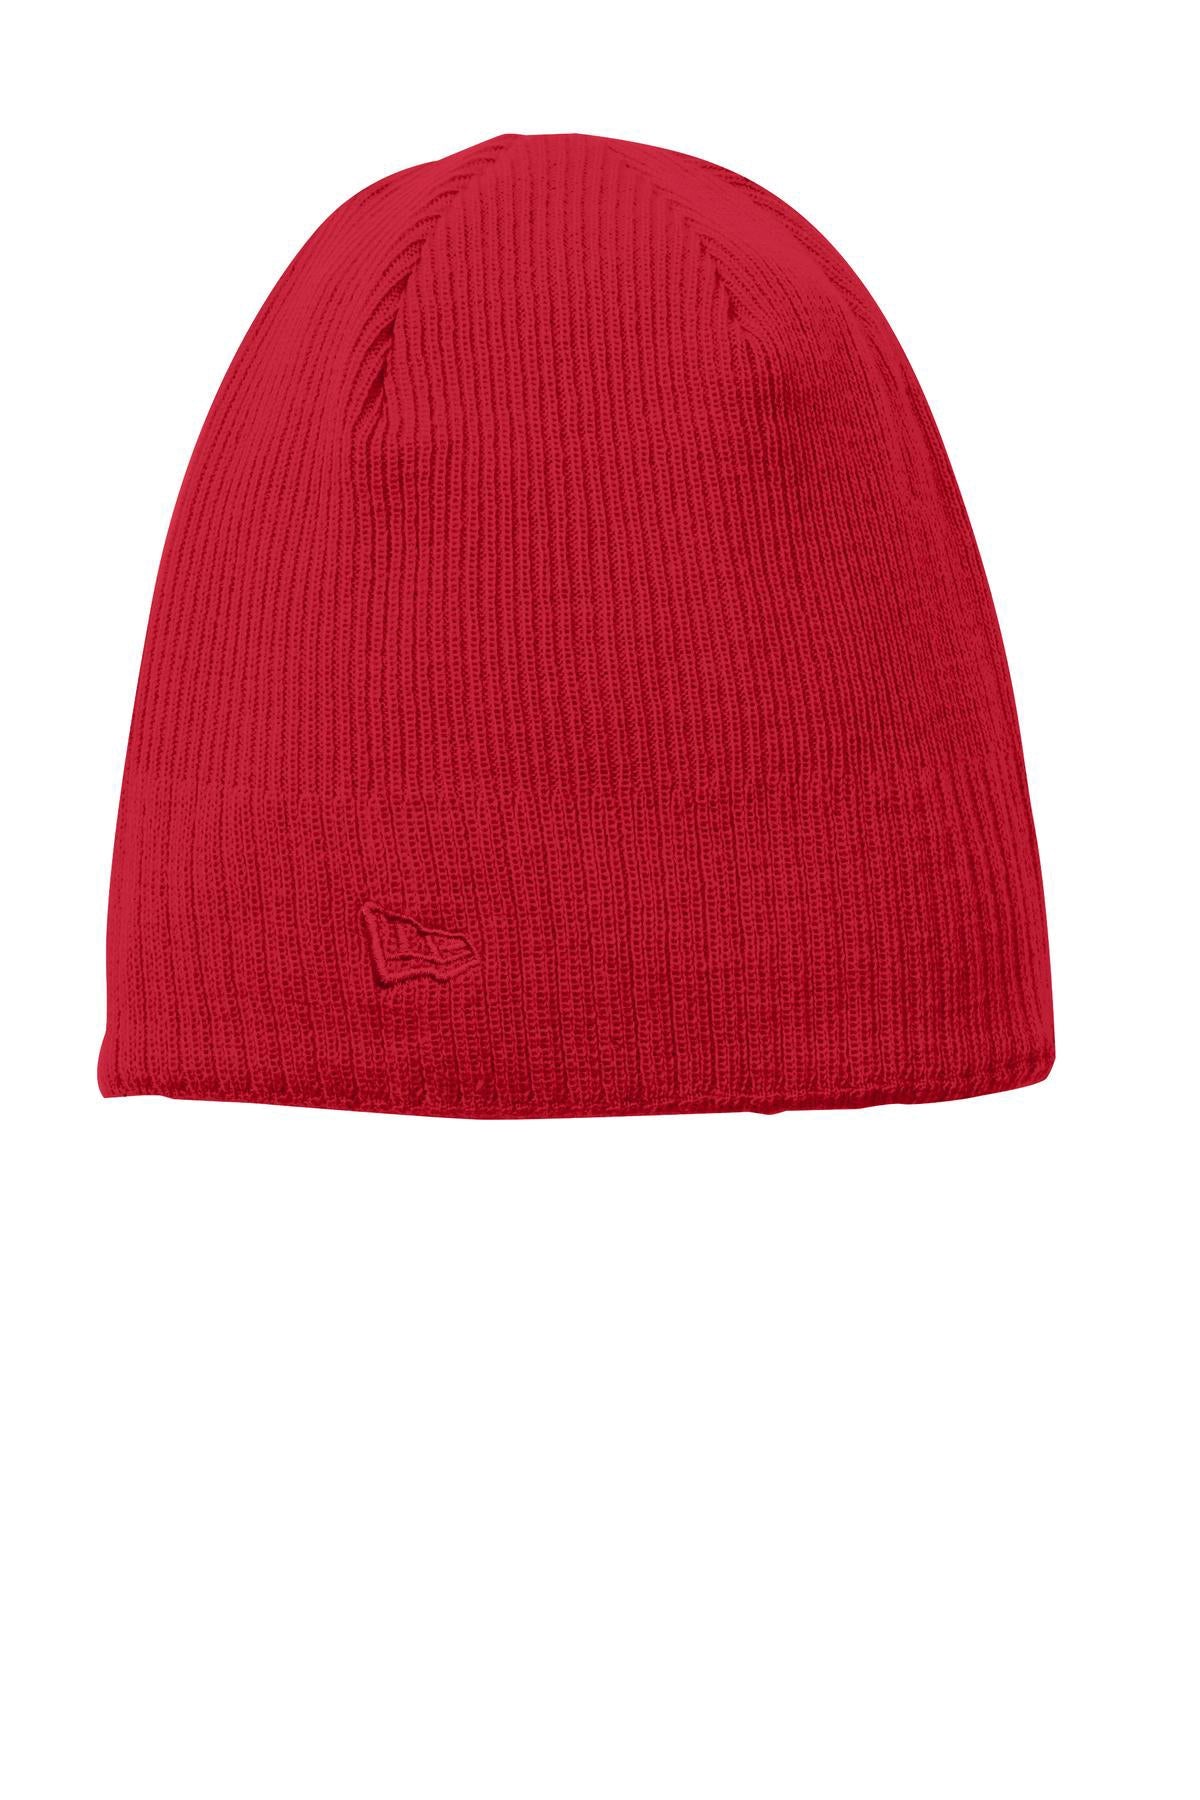 New Era Knit Branded Beanies, Red